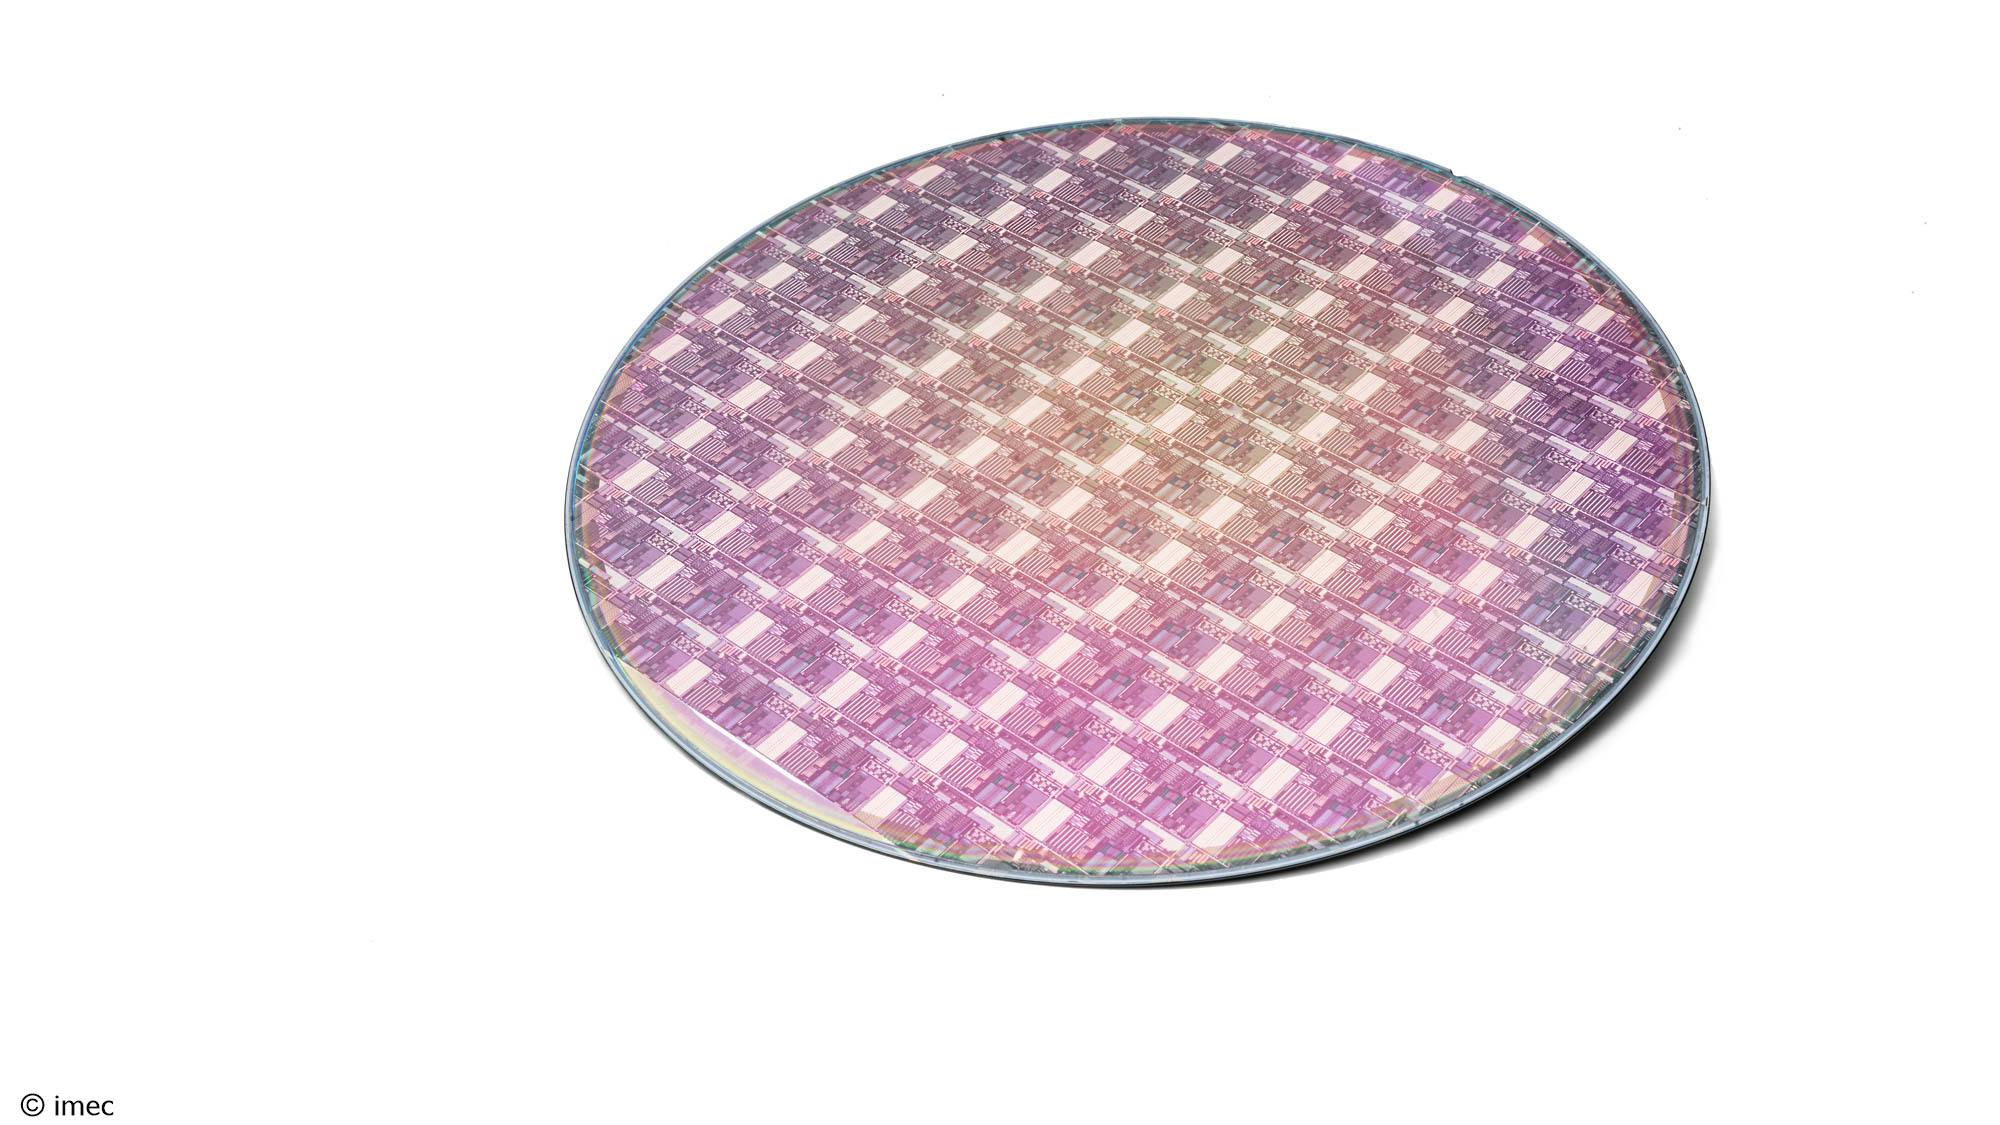 A 300mm wafer processed on imec’s iSiPP platform